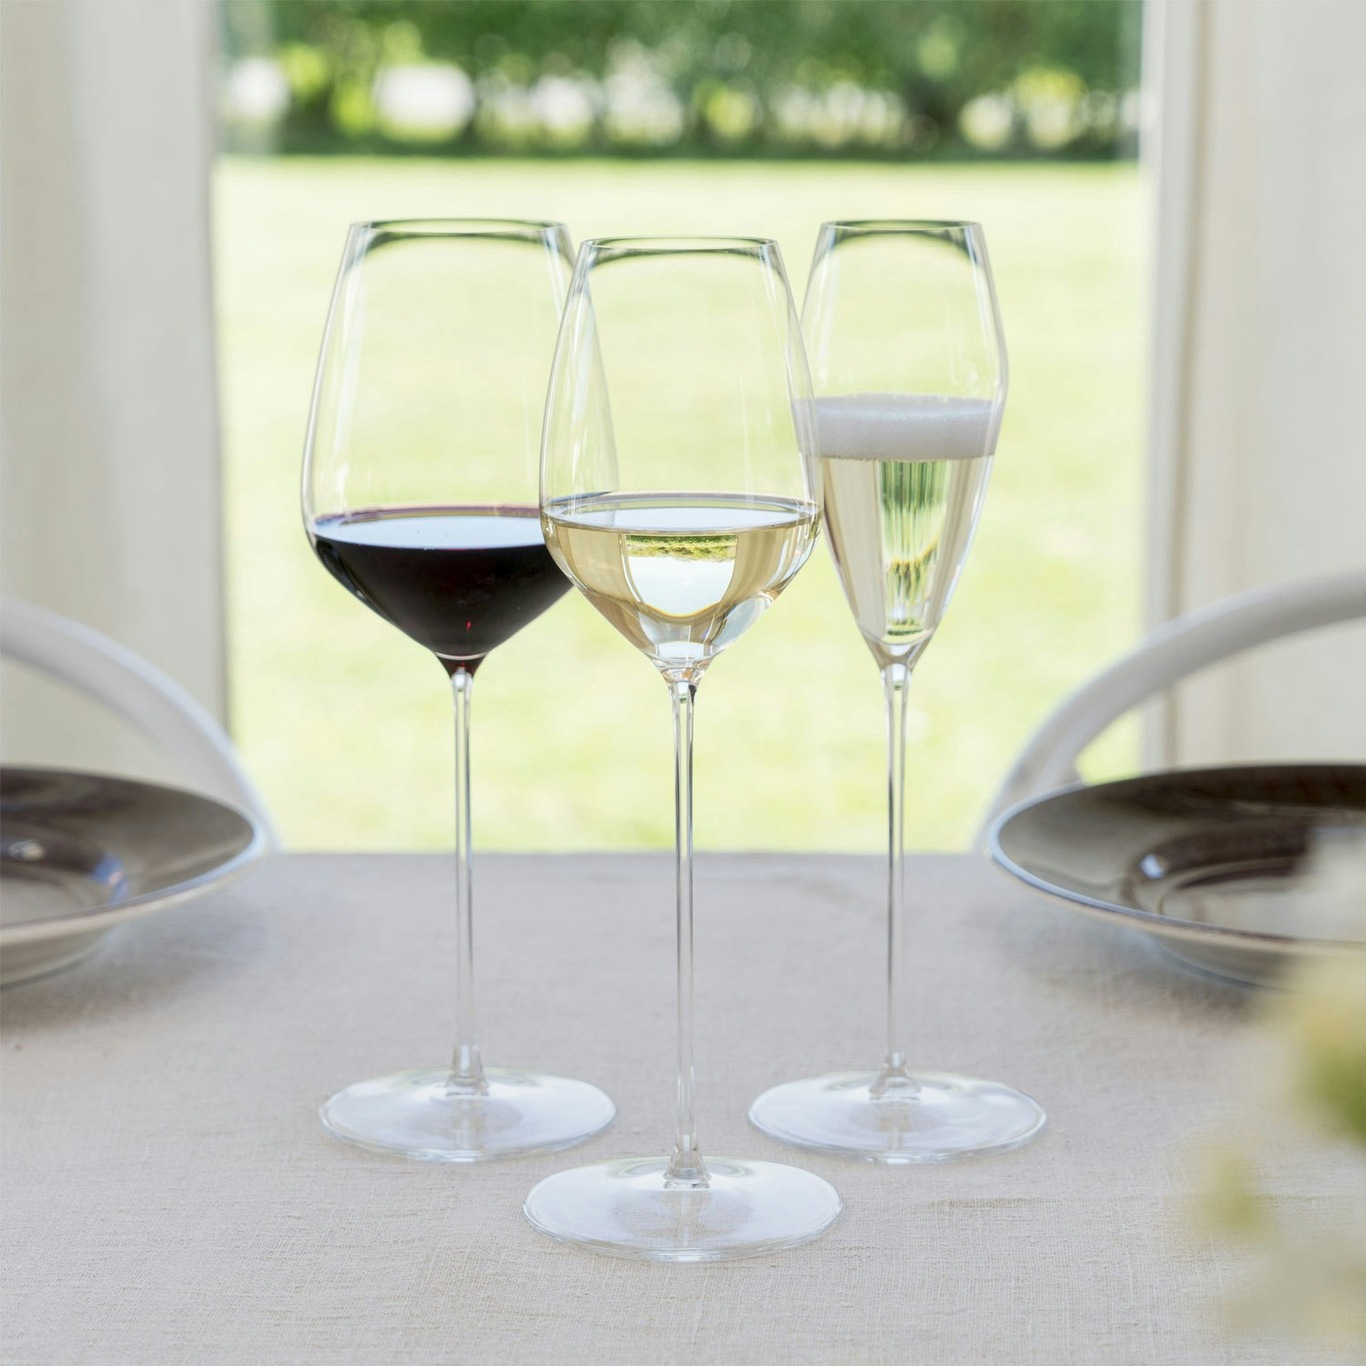 https://royaldesign.com/image/10/riedel-max-riesling-wine-glass-2?w=800&quality=80